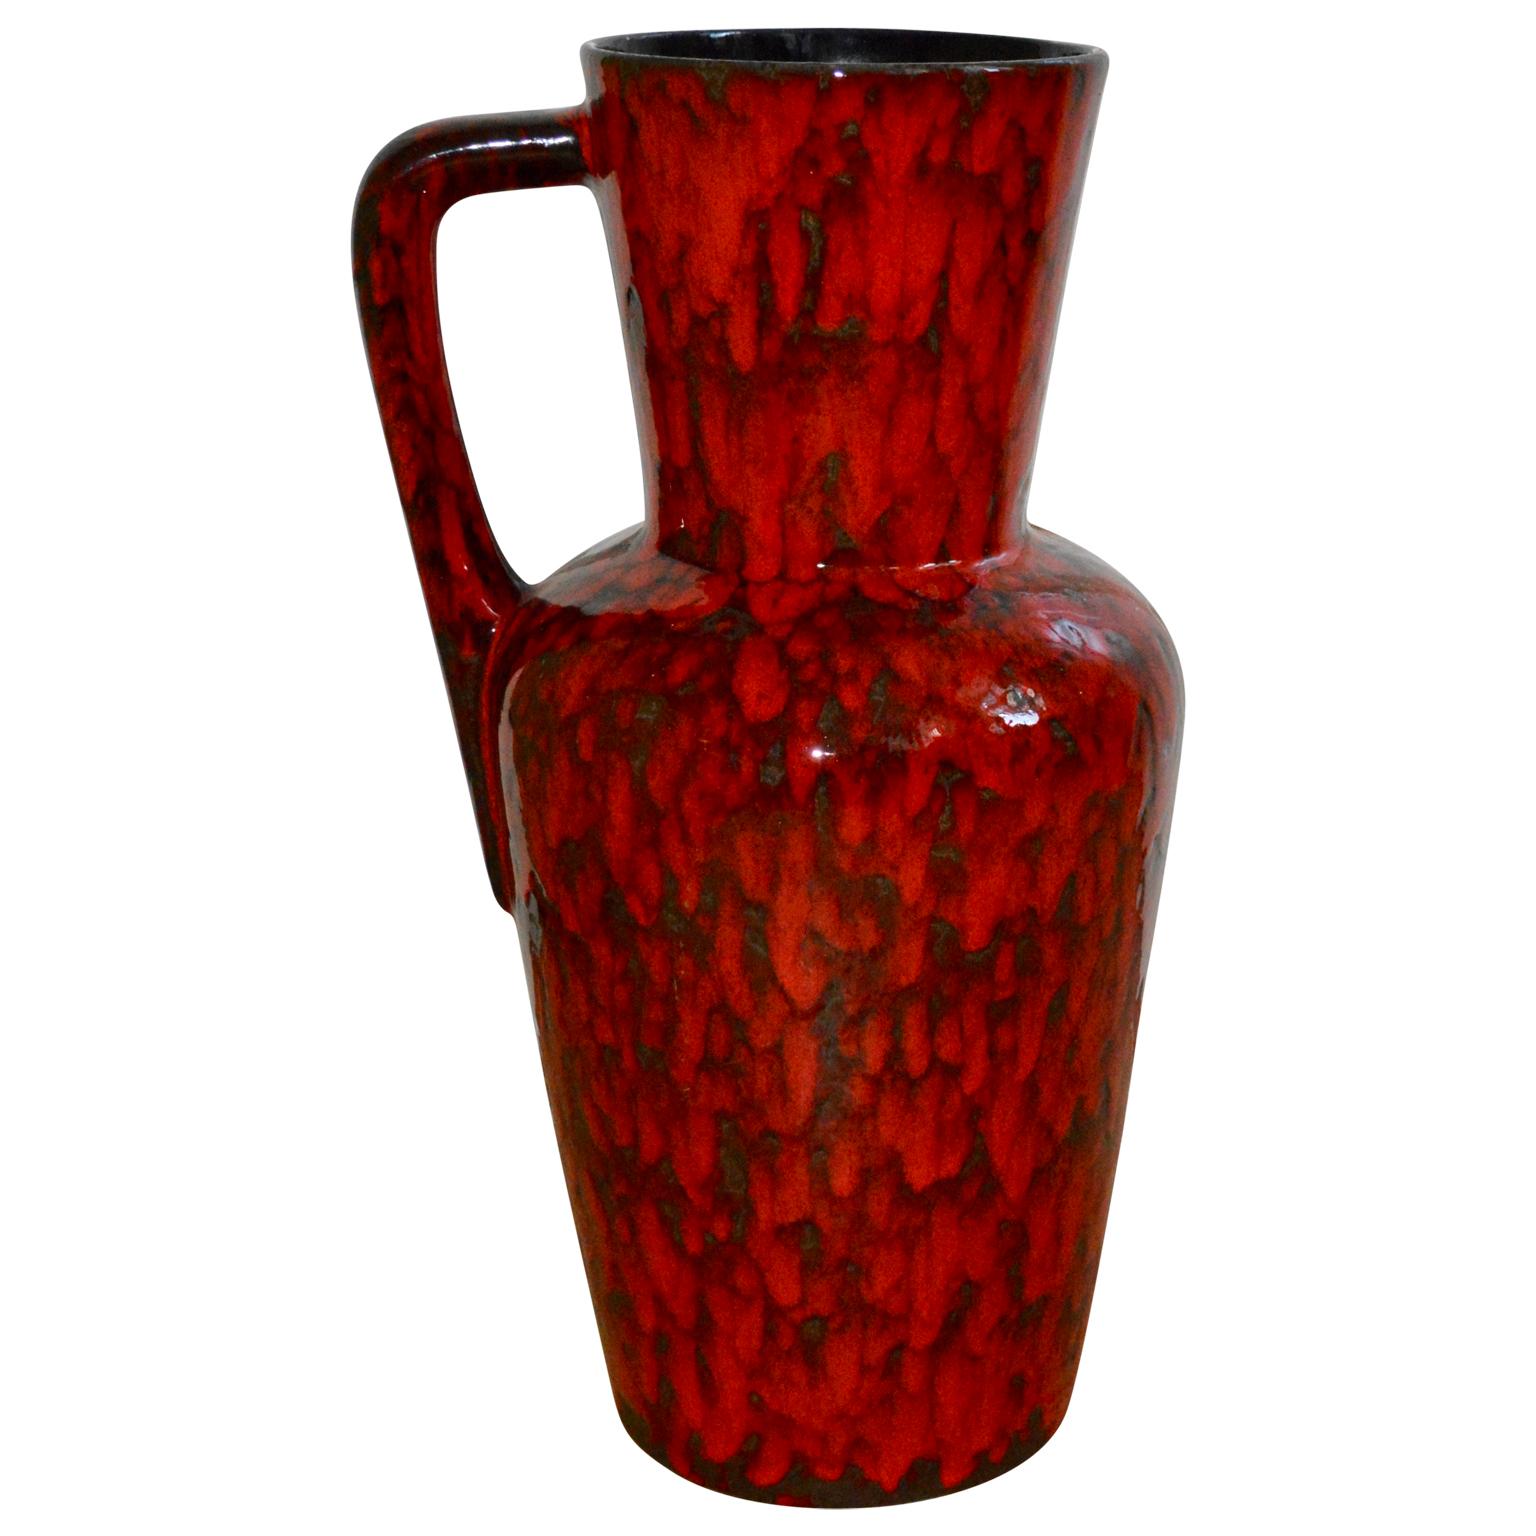 Midcentury huge red lava glazed, pitcher shaped, floor vase. The vase is numbered and attributed Scheurich Keramik.